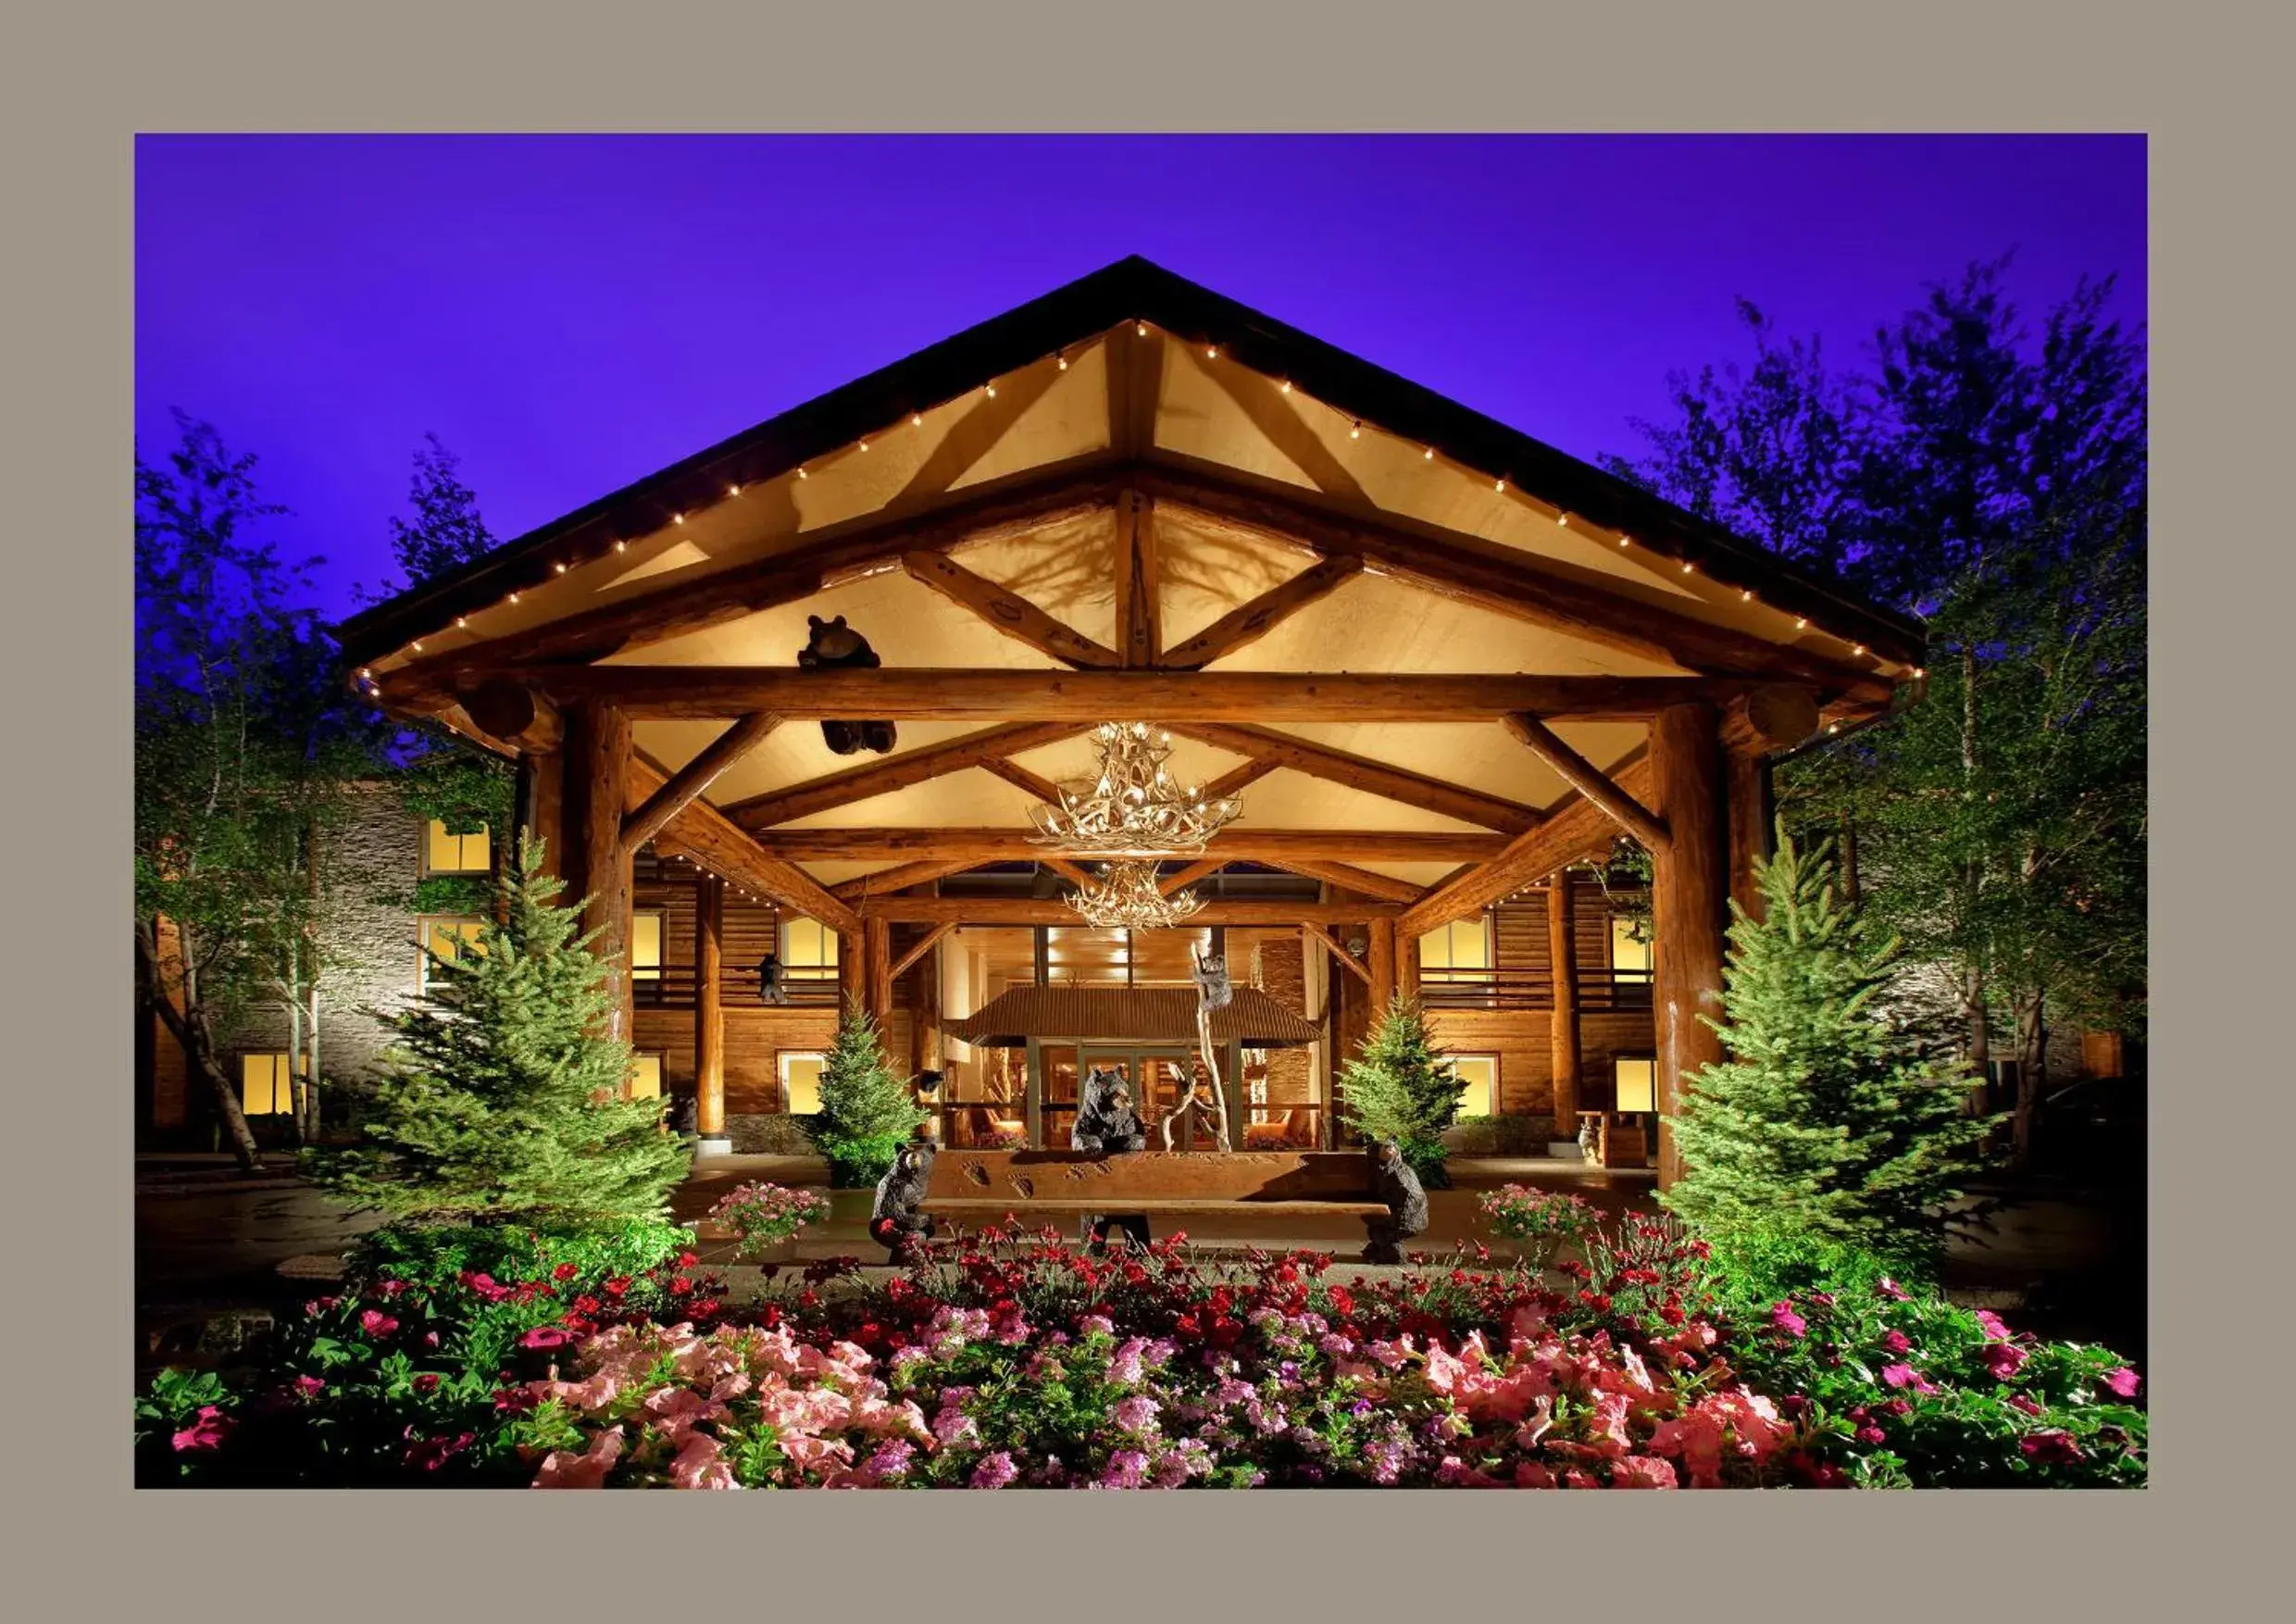 Facade/entrance in The Lodge at Jackson Hole